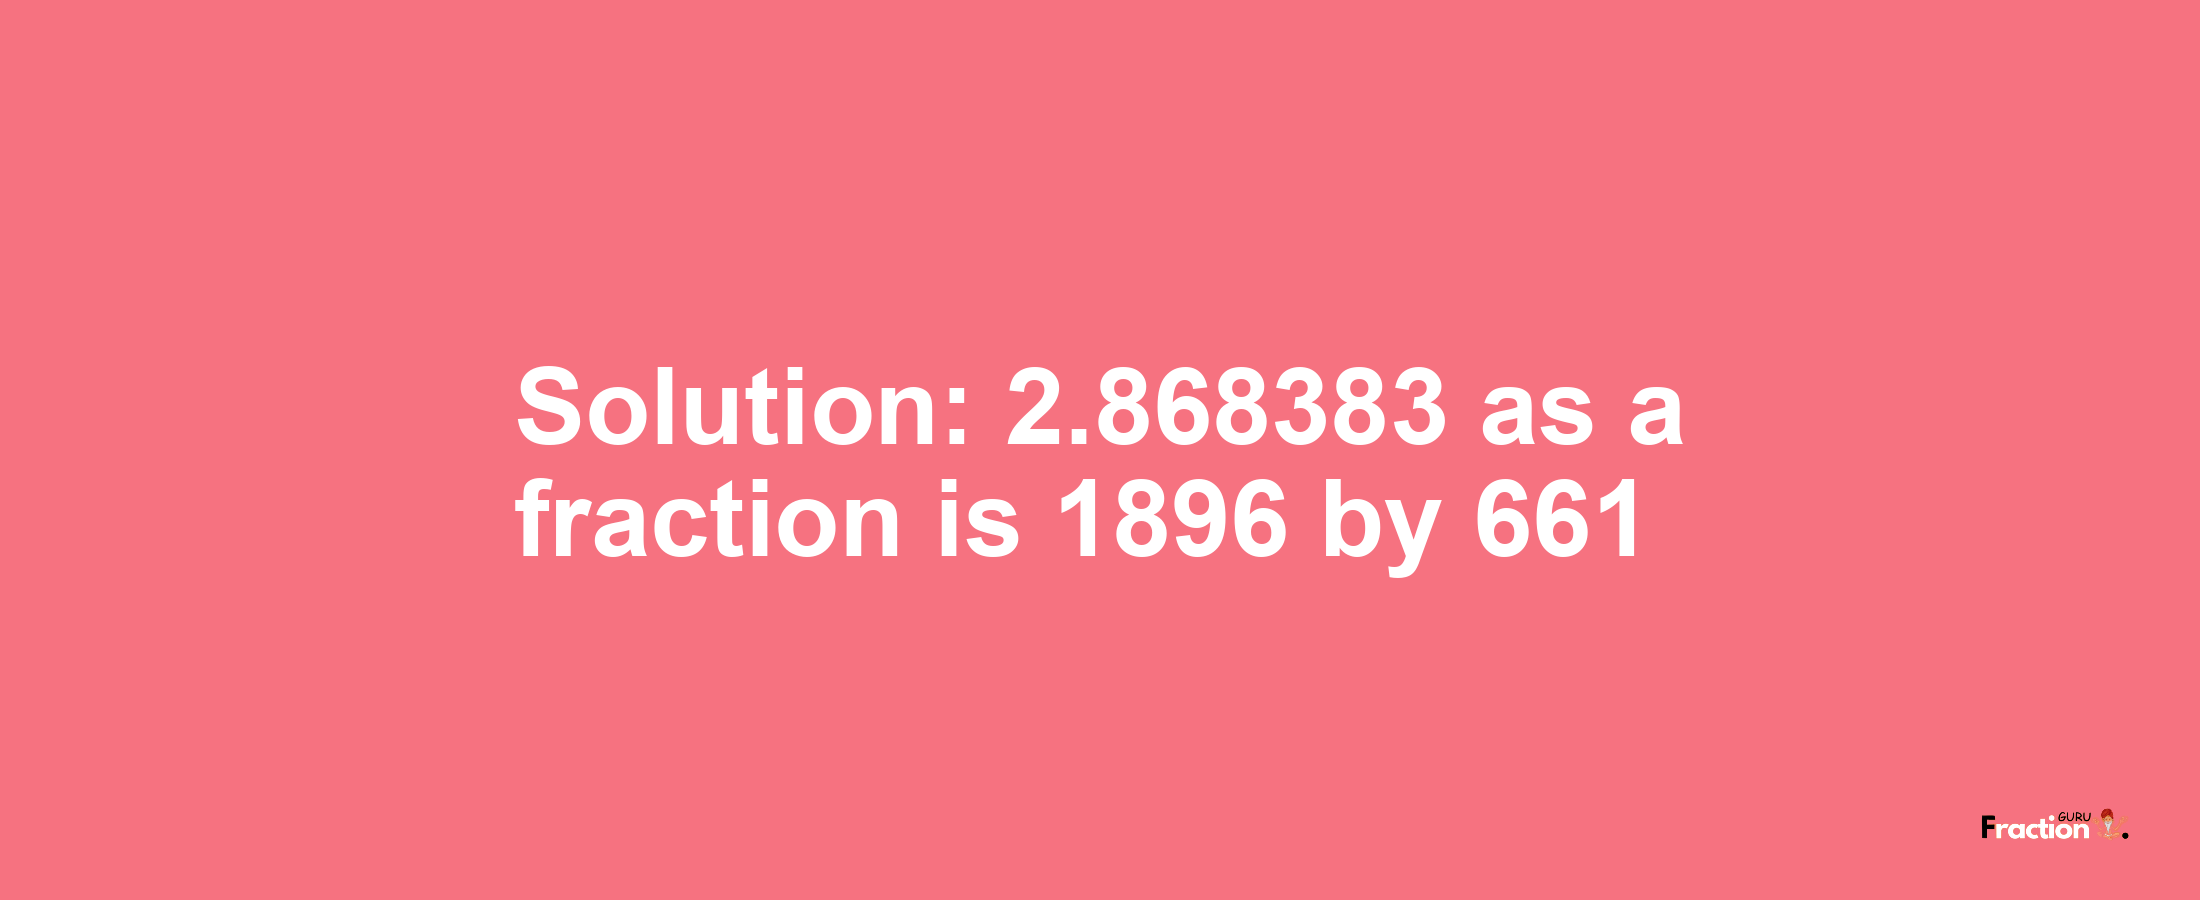 Solution:2.868383 as a fraction is 1896/661